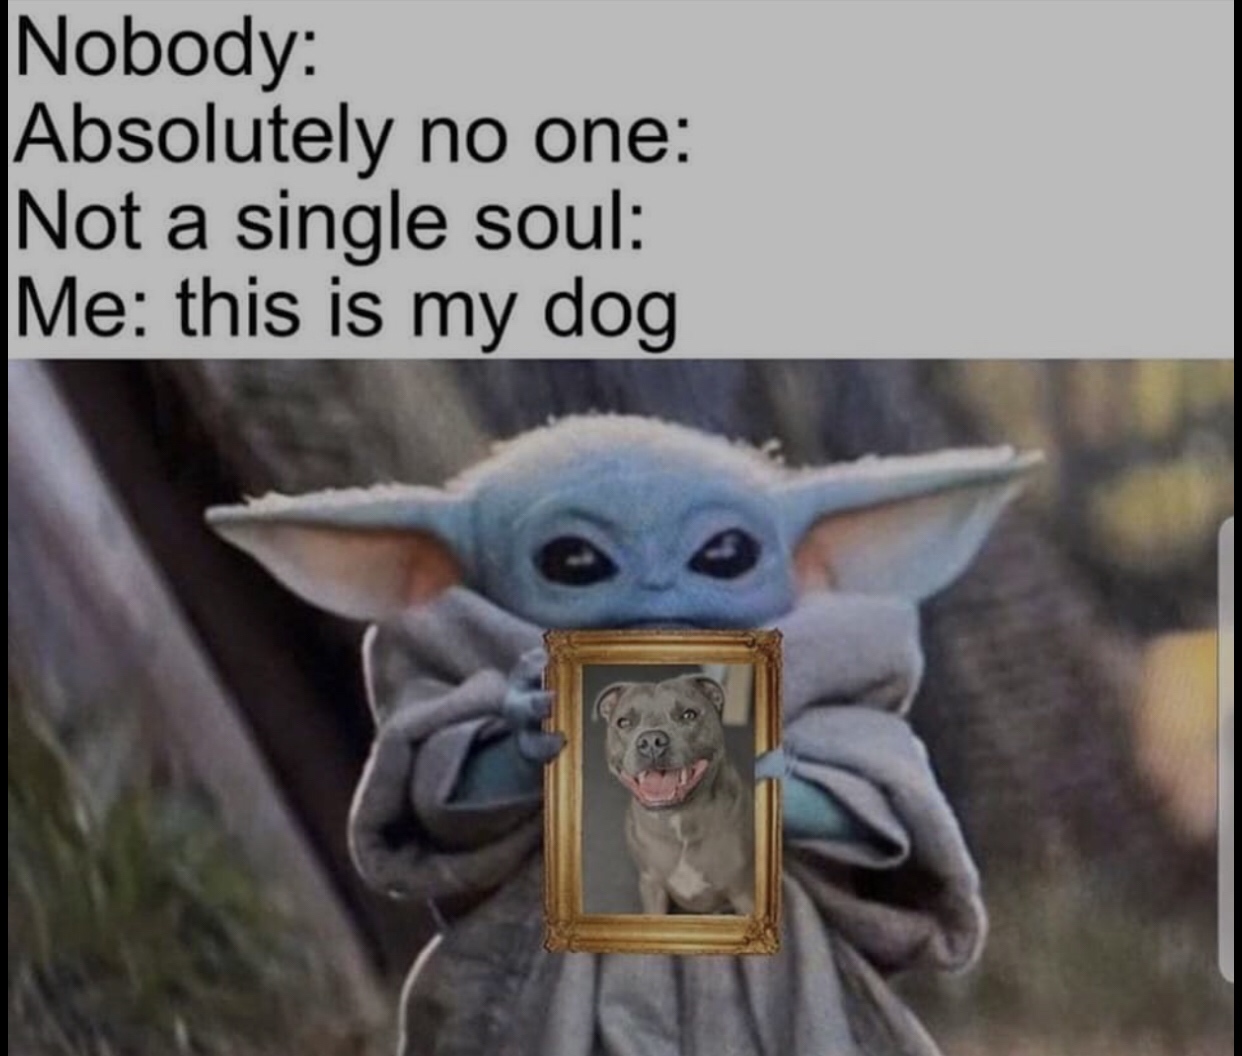 baby yoda dog meme - Nobody Absolutely no one Not a single soul Me this is my dog